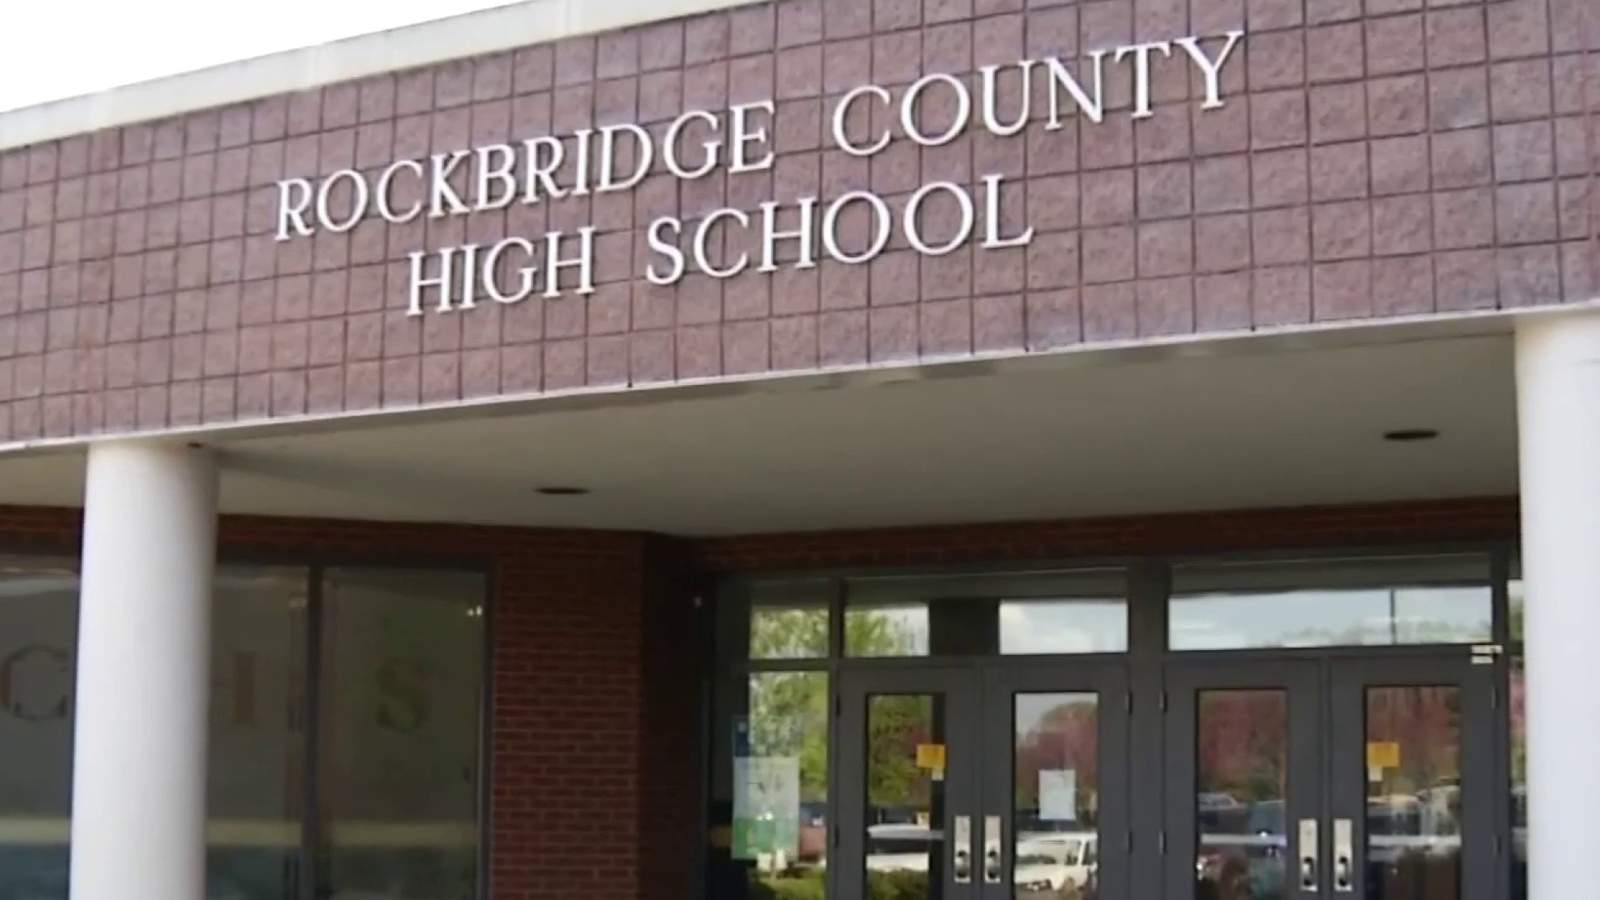 Rockbridge County High School will not participate in winter sports this year